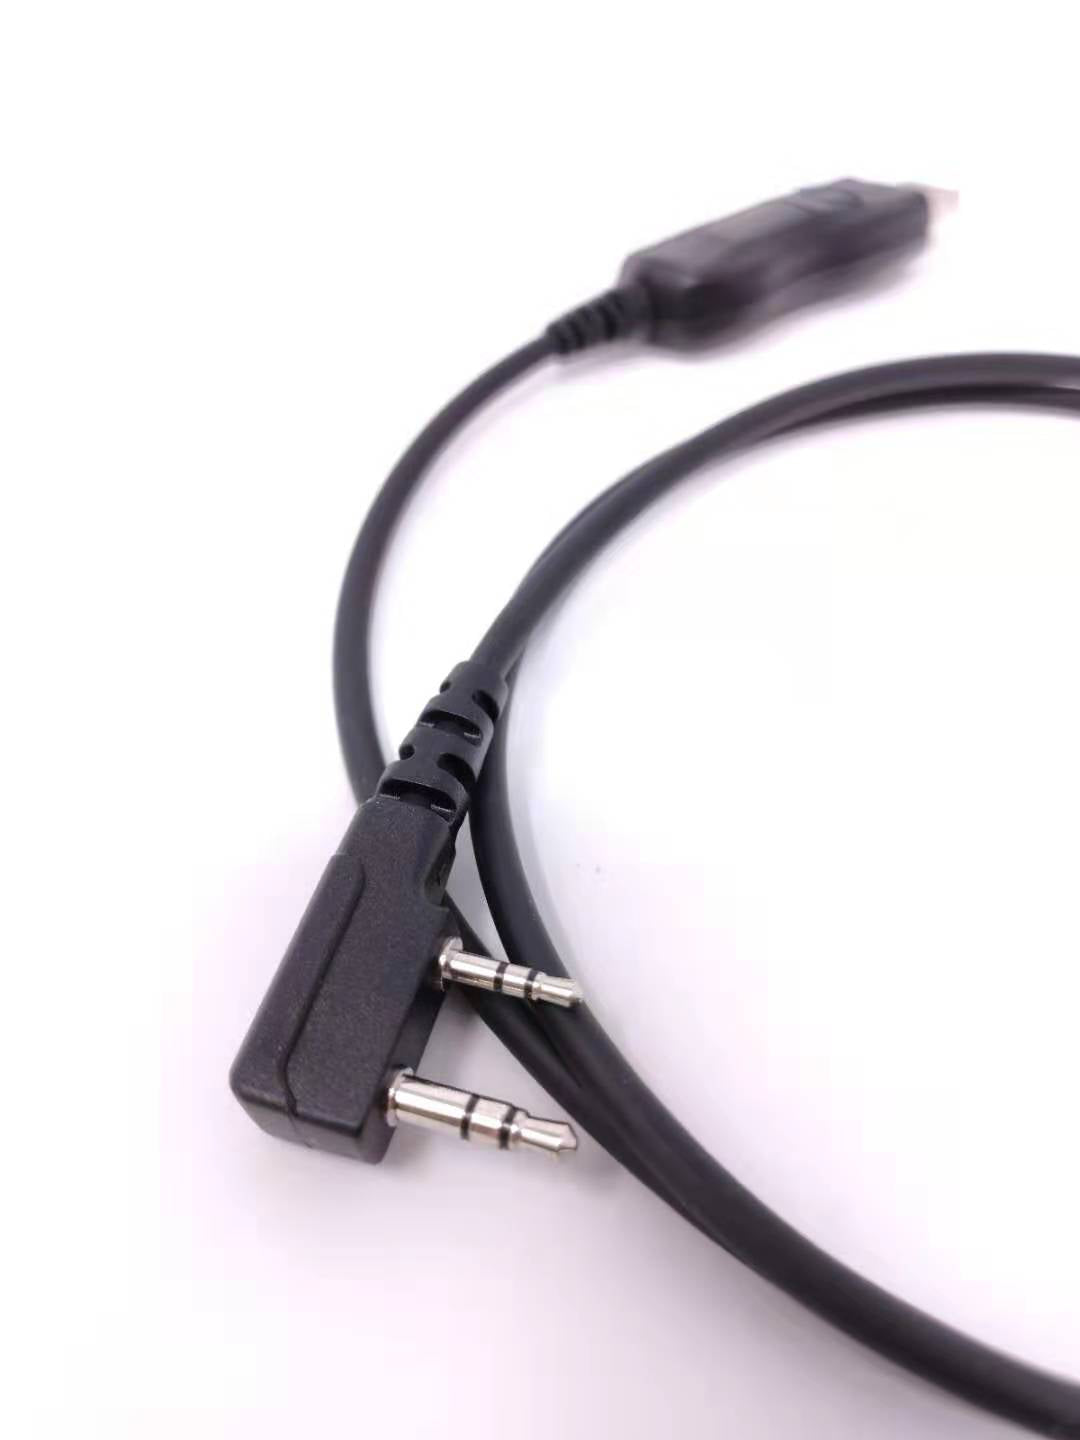 YDC TECH™ FTDI Genuine USB Programming Cable for BTECH, BaoFeng, Kenwood, and AnyTone Radio